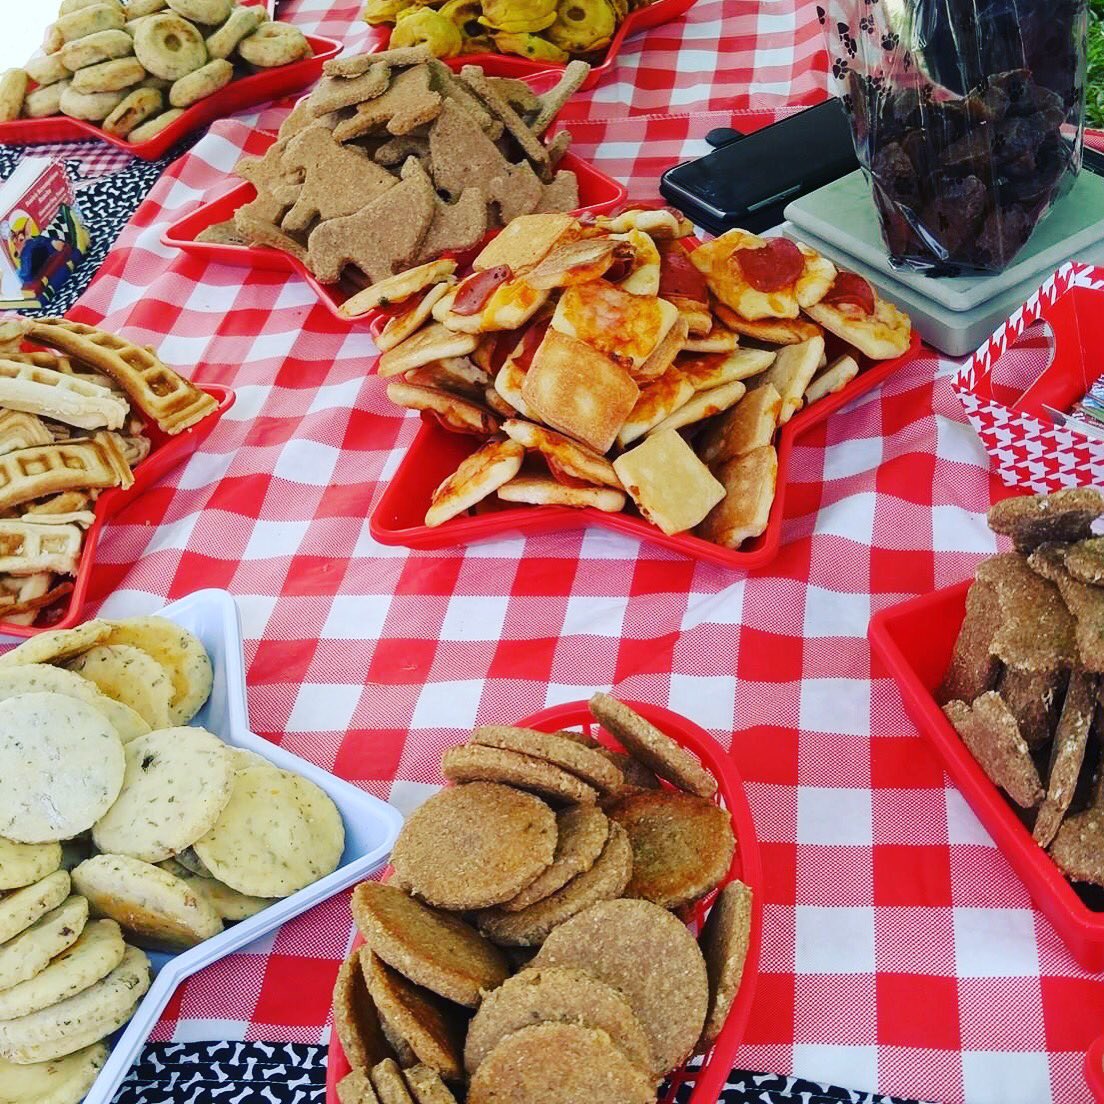 Come to Market July 1st - we have treats for everyone! #denton #communitymarket #independencemarket #giveaways